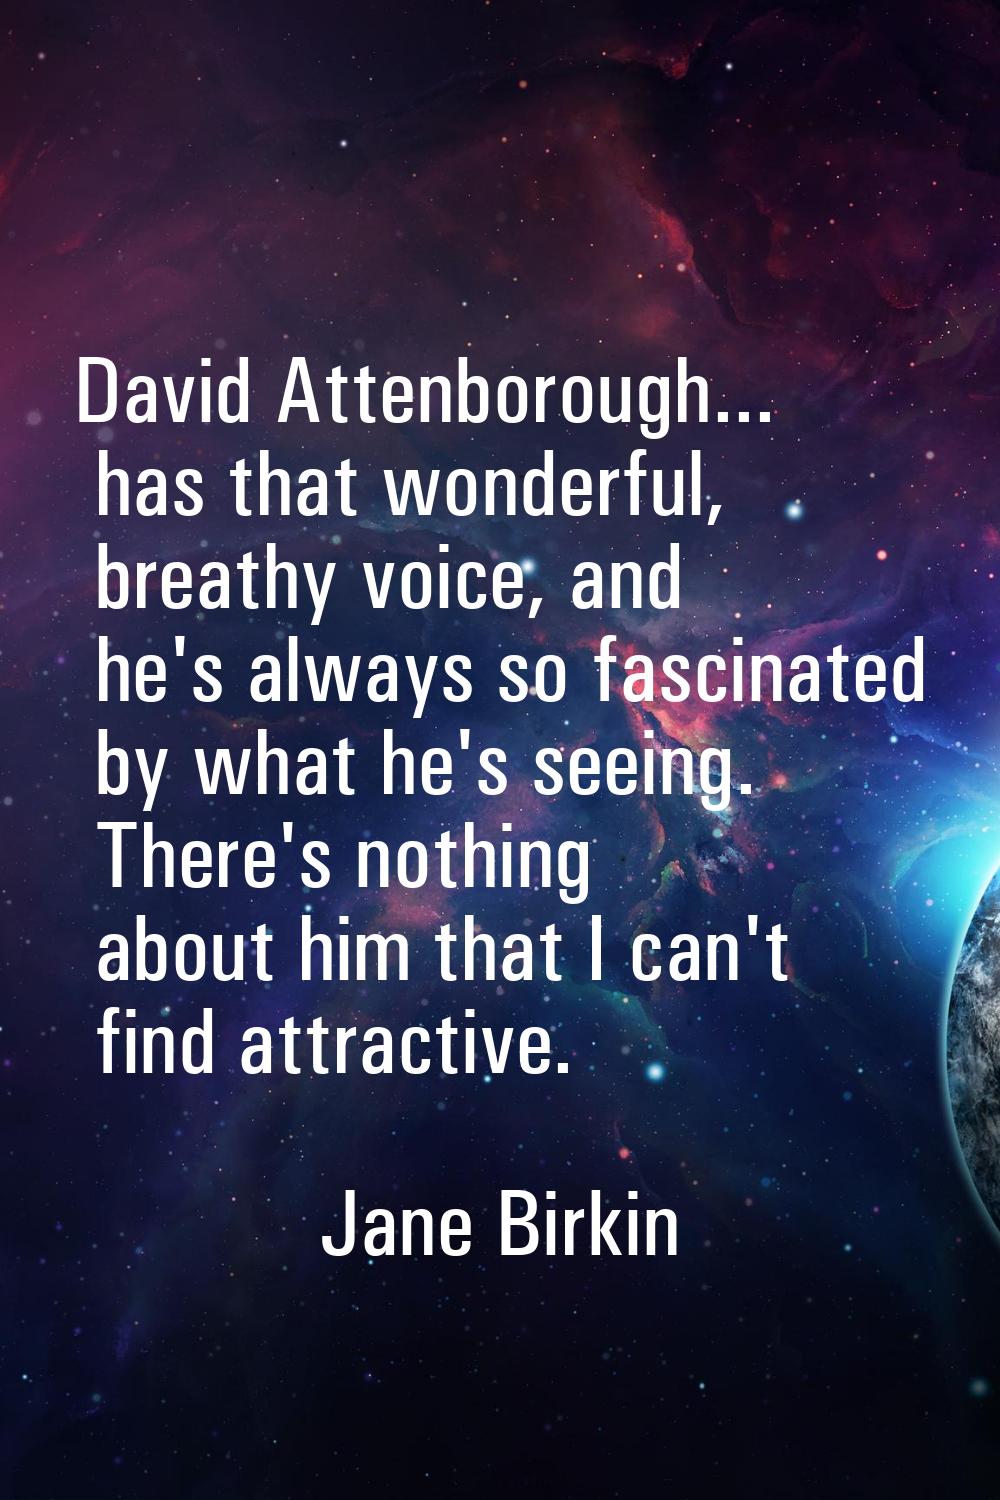 David Attenborough... has that wonderful, breathy voice, and he's always so fascinated by what he's